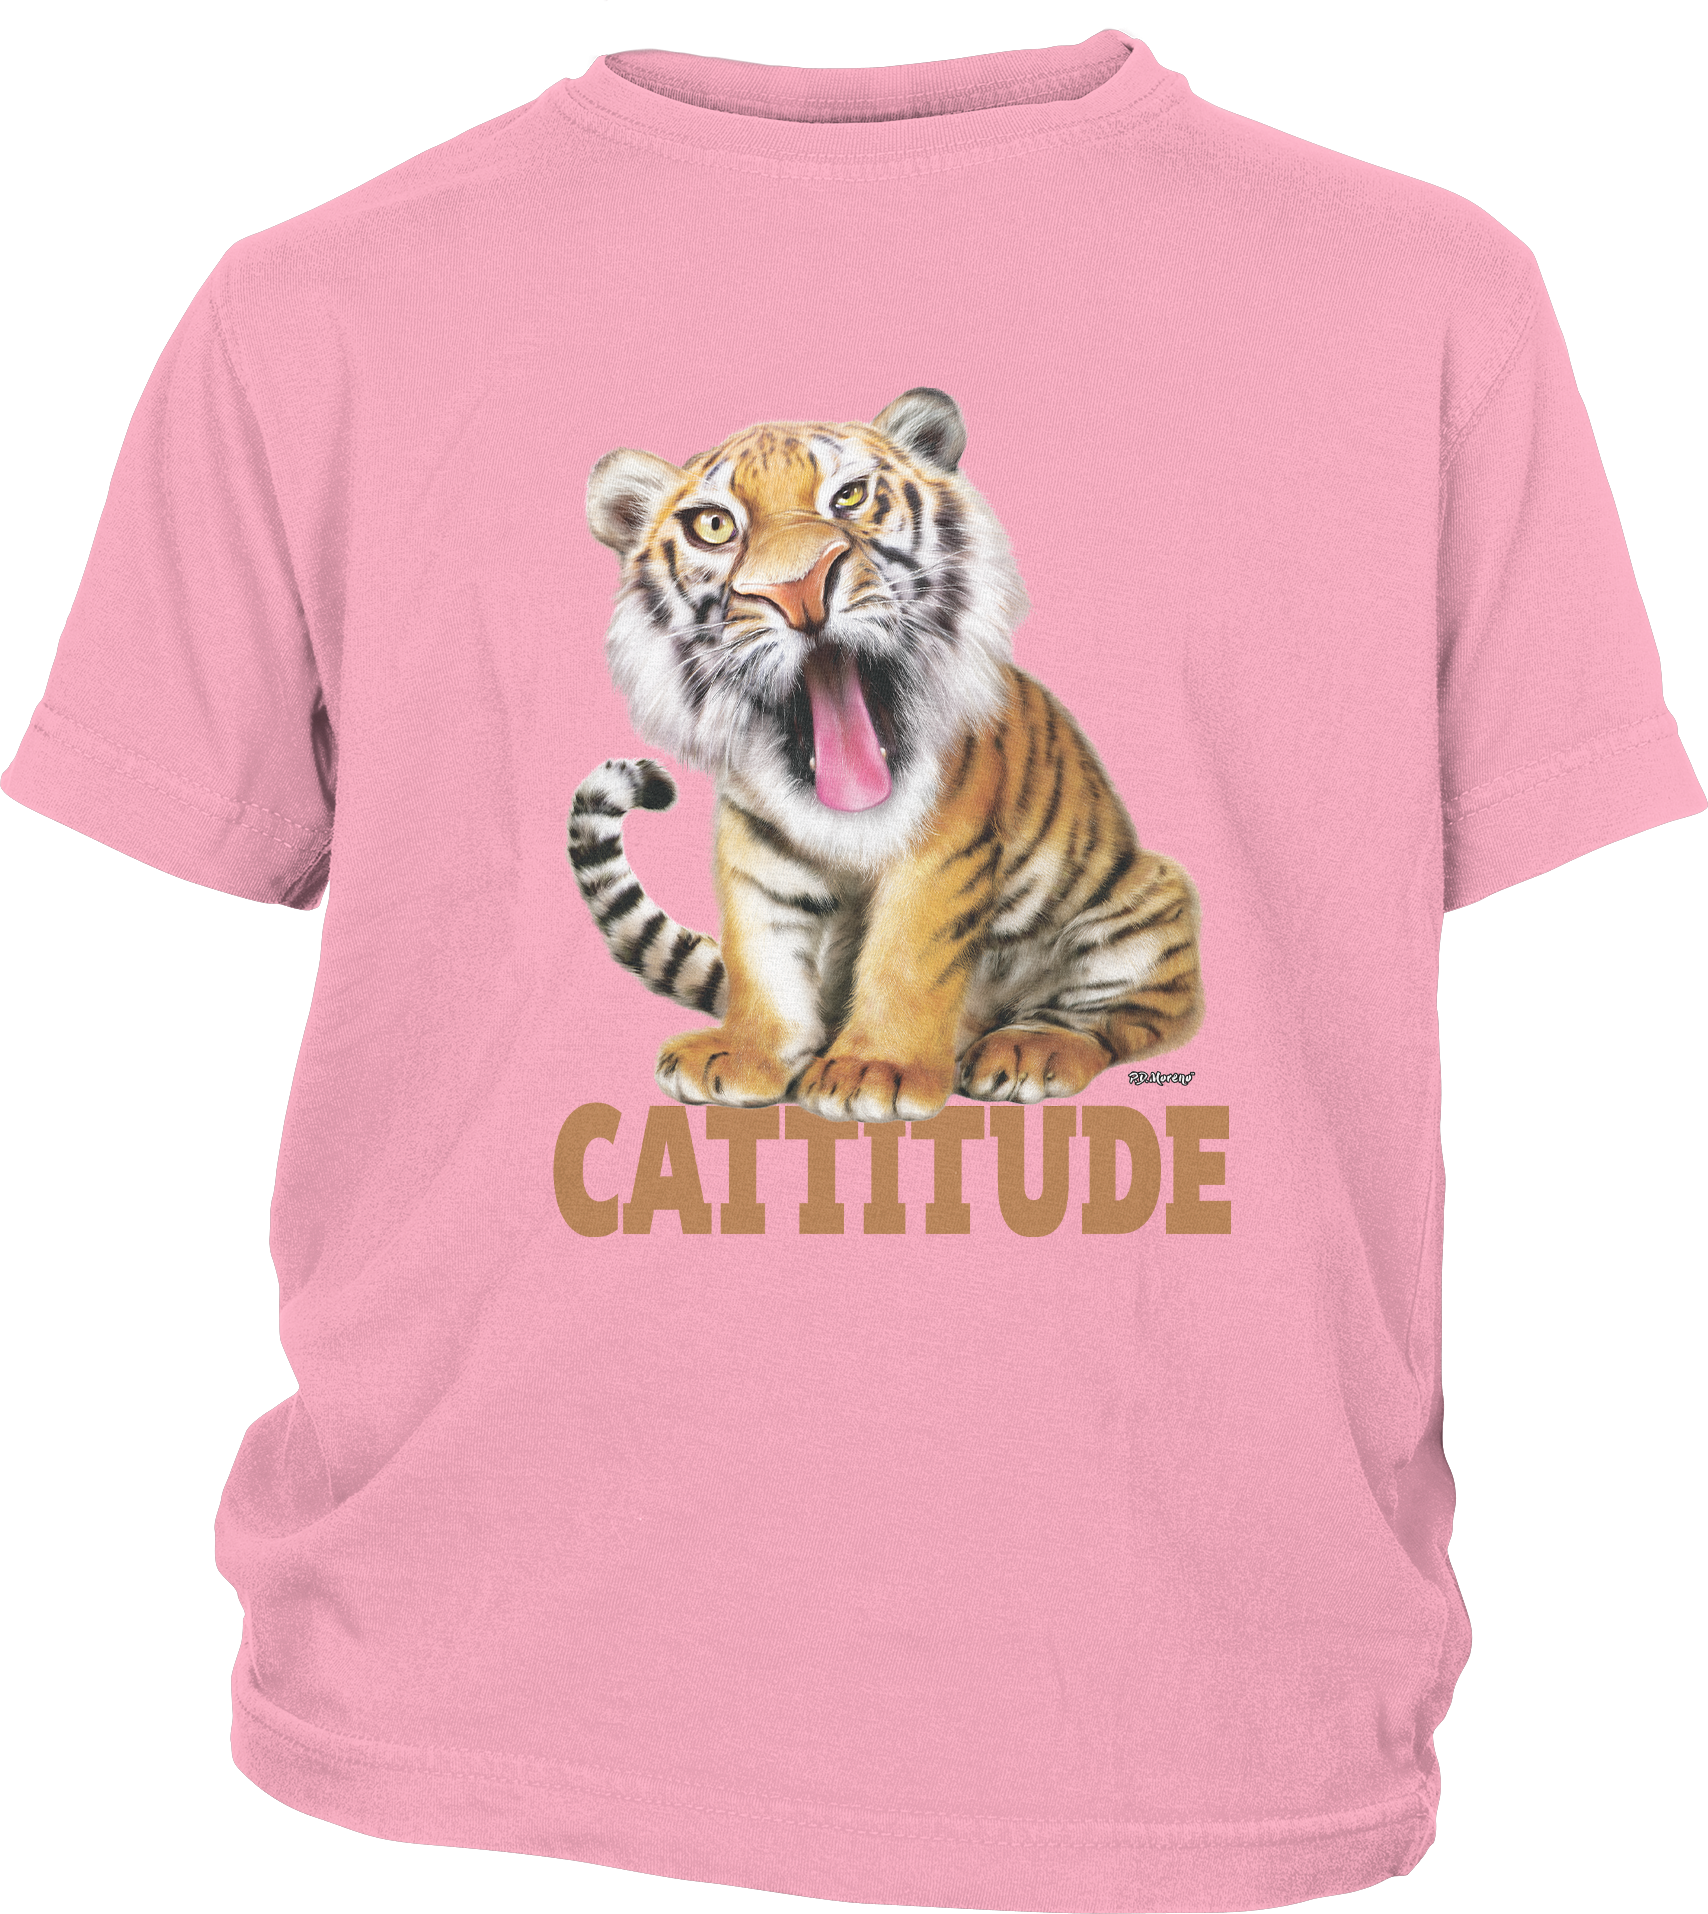 Youth Short Sleeve T-Shirt with AFL Tiger